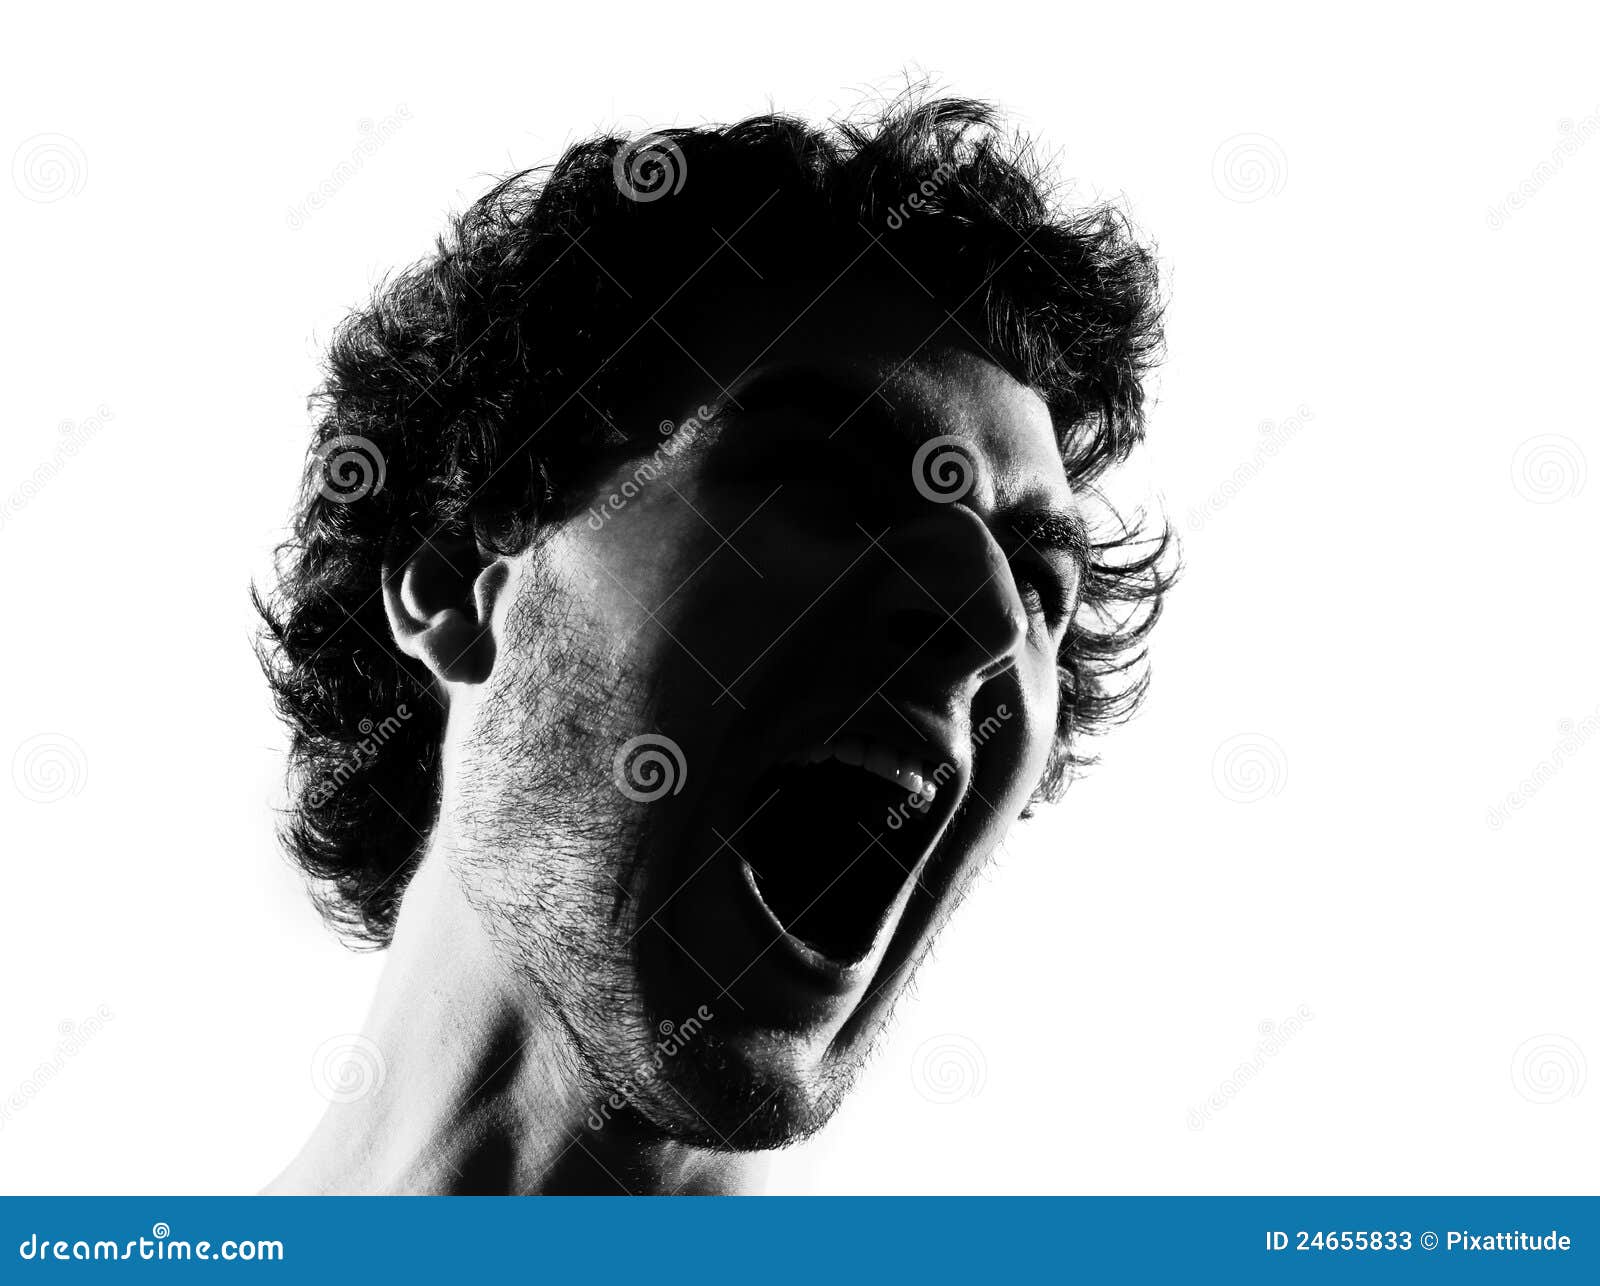 young man silhouette screaming angry portrait